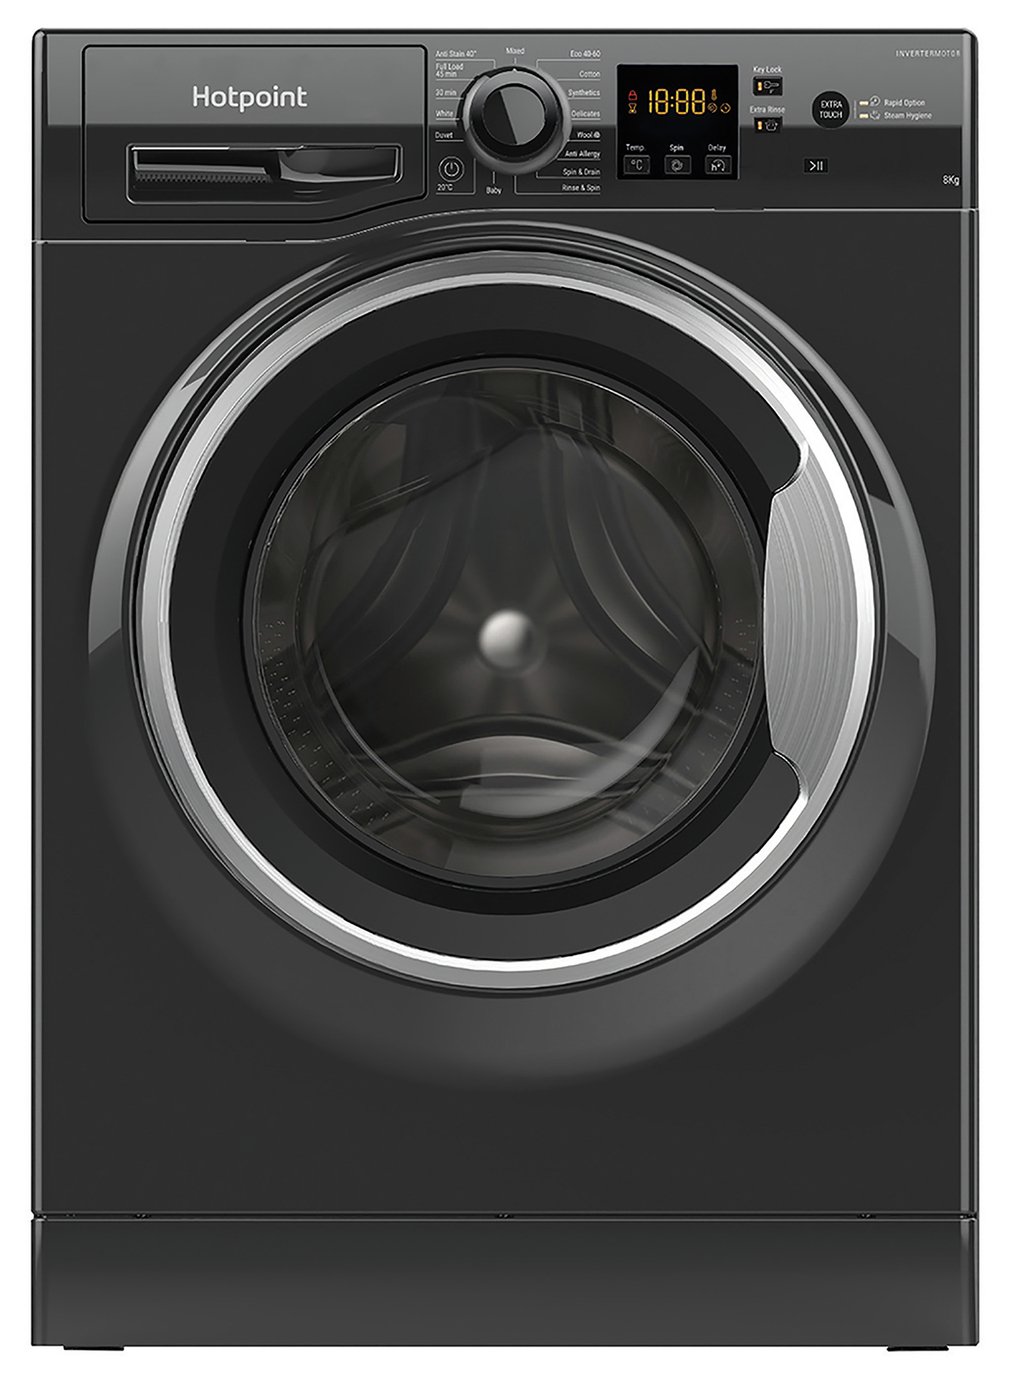 Hotpoint NSWM843CBS 8KG 1400 Spin Washing Machine Review